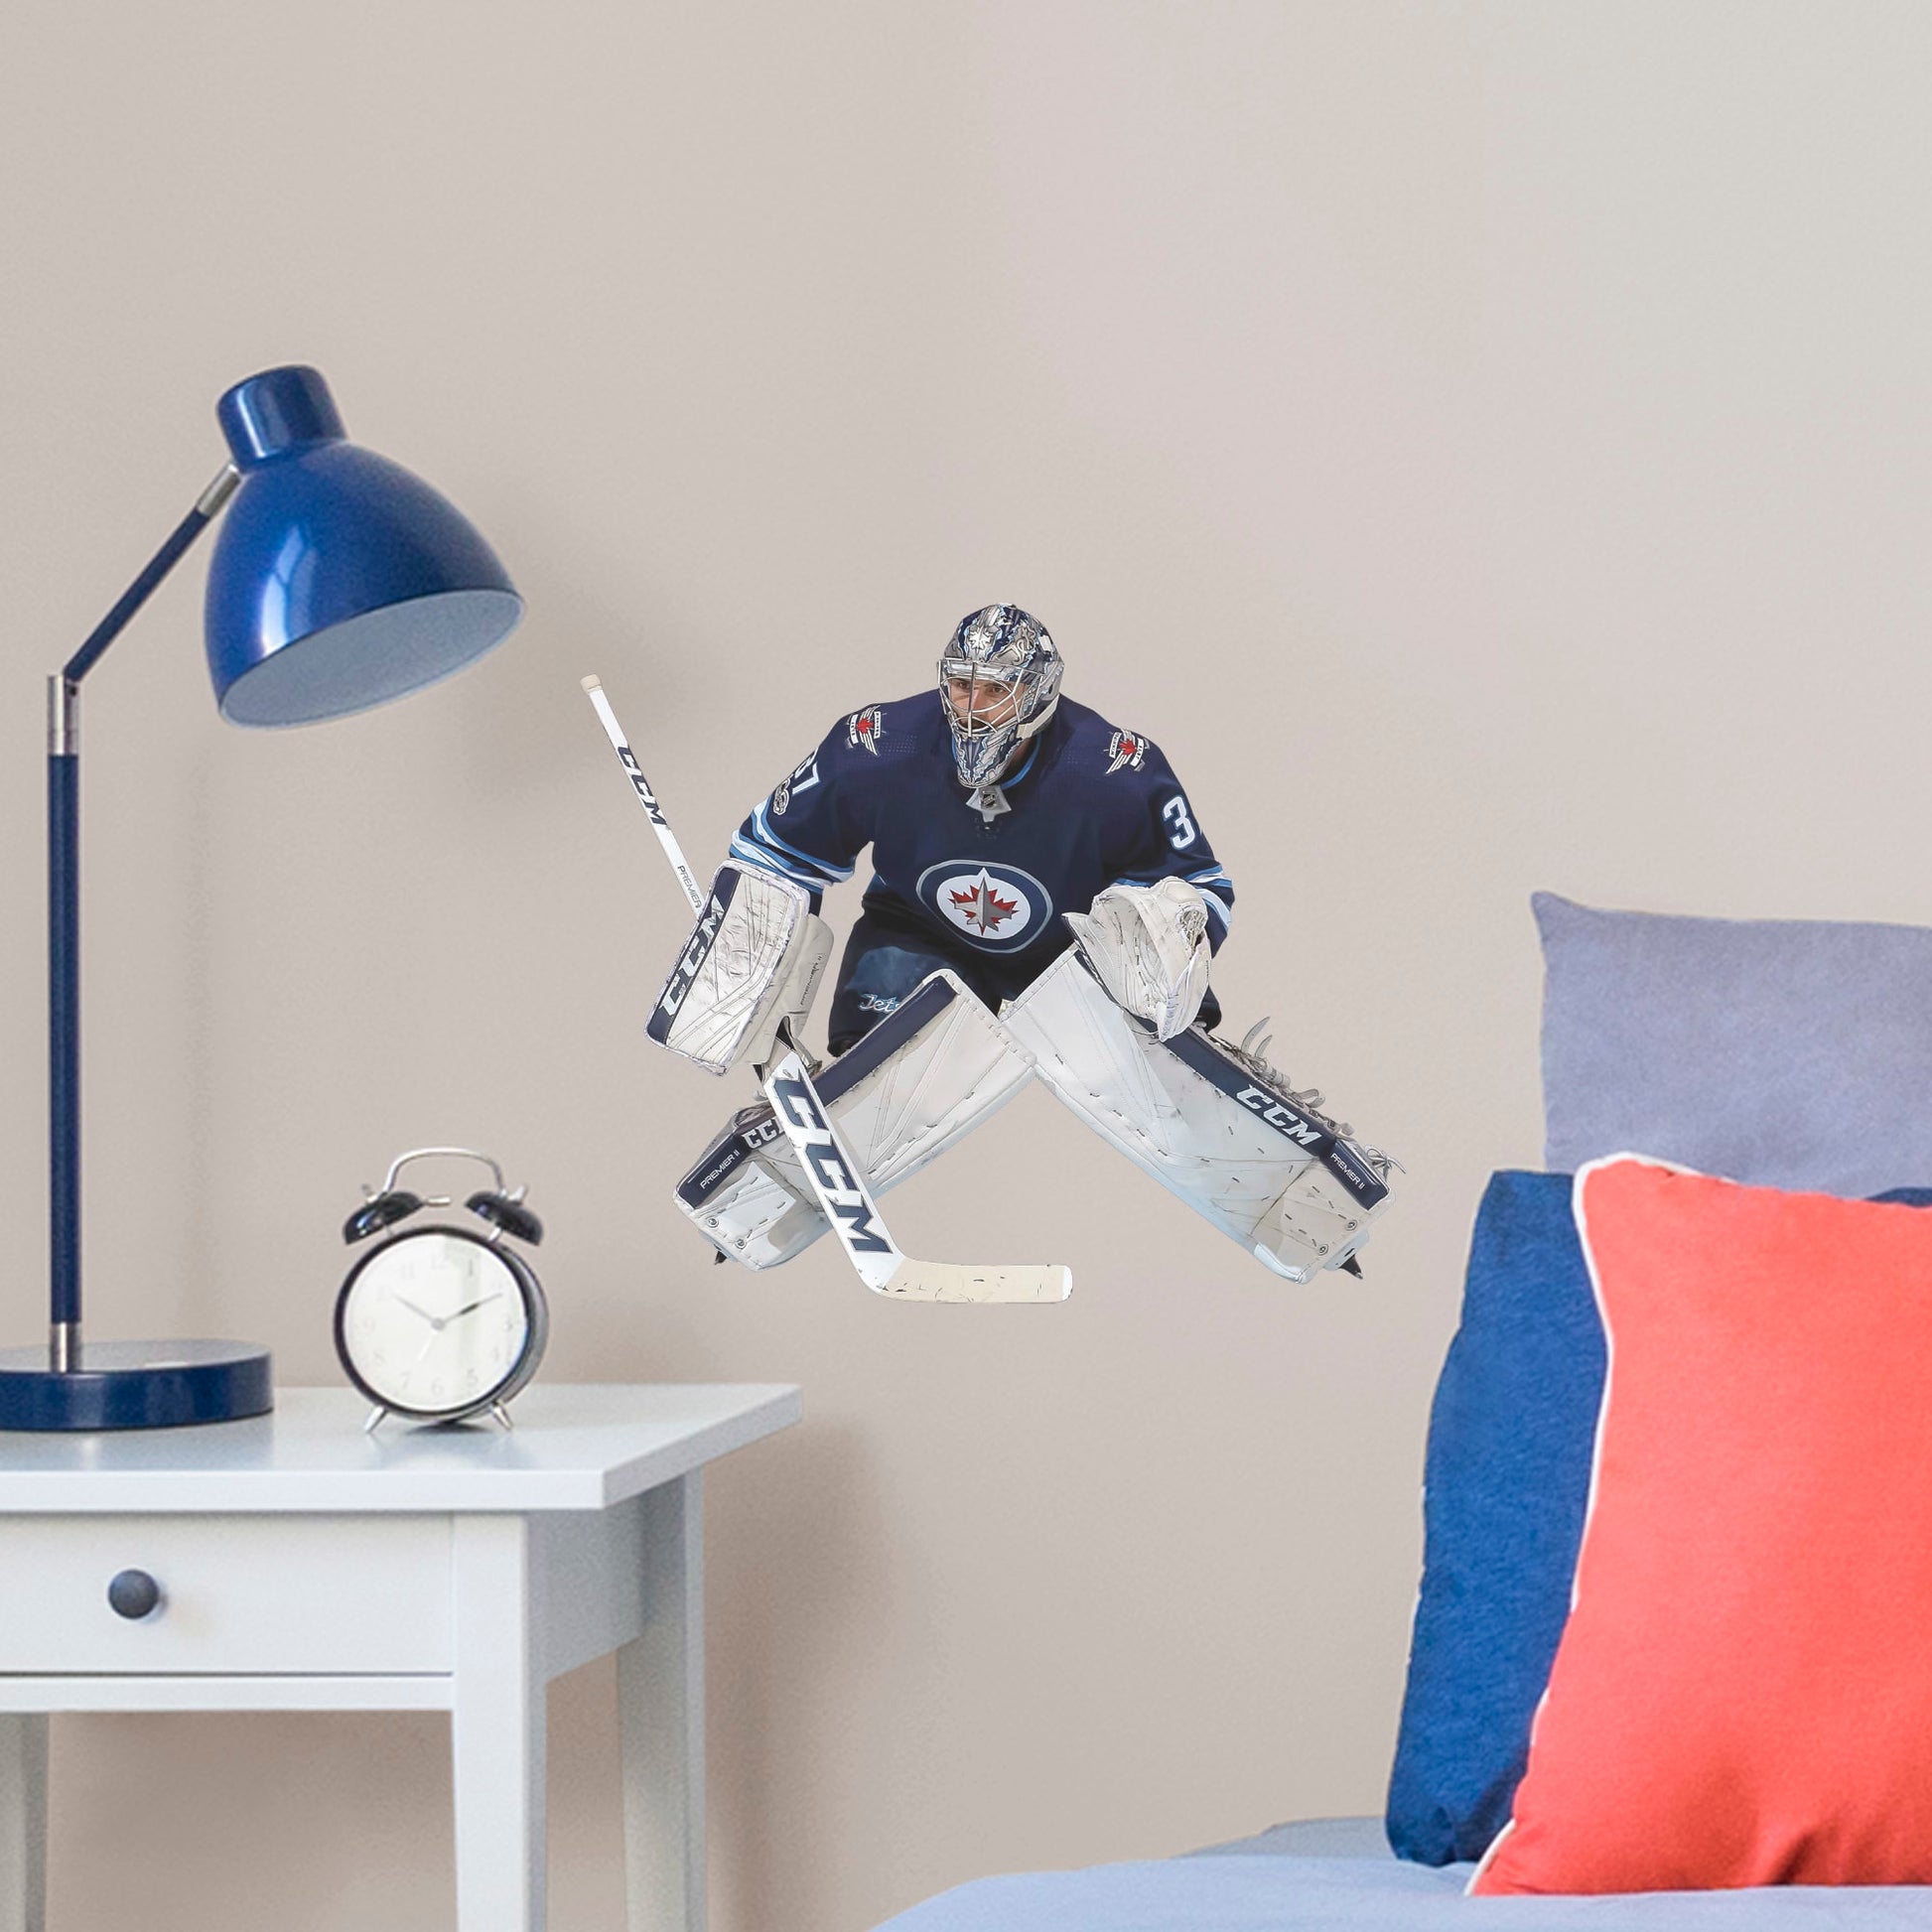 Large Athlete + 2 Decals (14"W x 12"H) Opposing teams should be worried when they see Connor Hellebuyck in the goal, and now you can bring his epic defense skills to life in your own home with this Officially Licensed NHL removable wall decal. Pictured here ready to stop any puck that comes his way, this wall decal of Hellebuyck will make the perfect addition to your bedroom, office, or fan room, and it even makes a great gift for your favorite Jets fanatic!